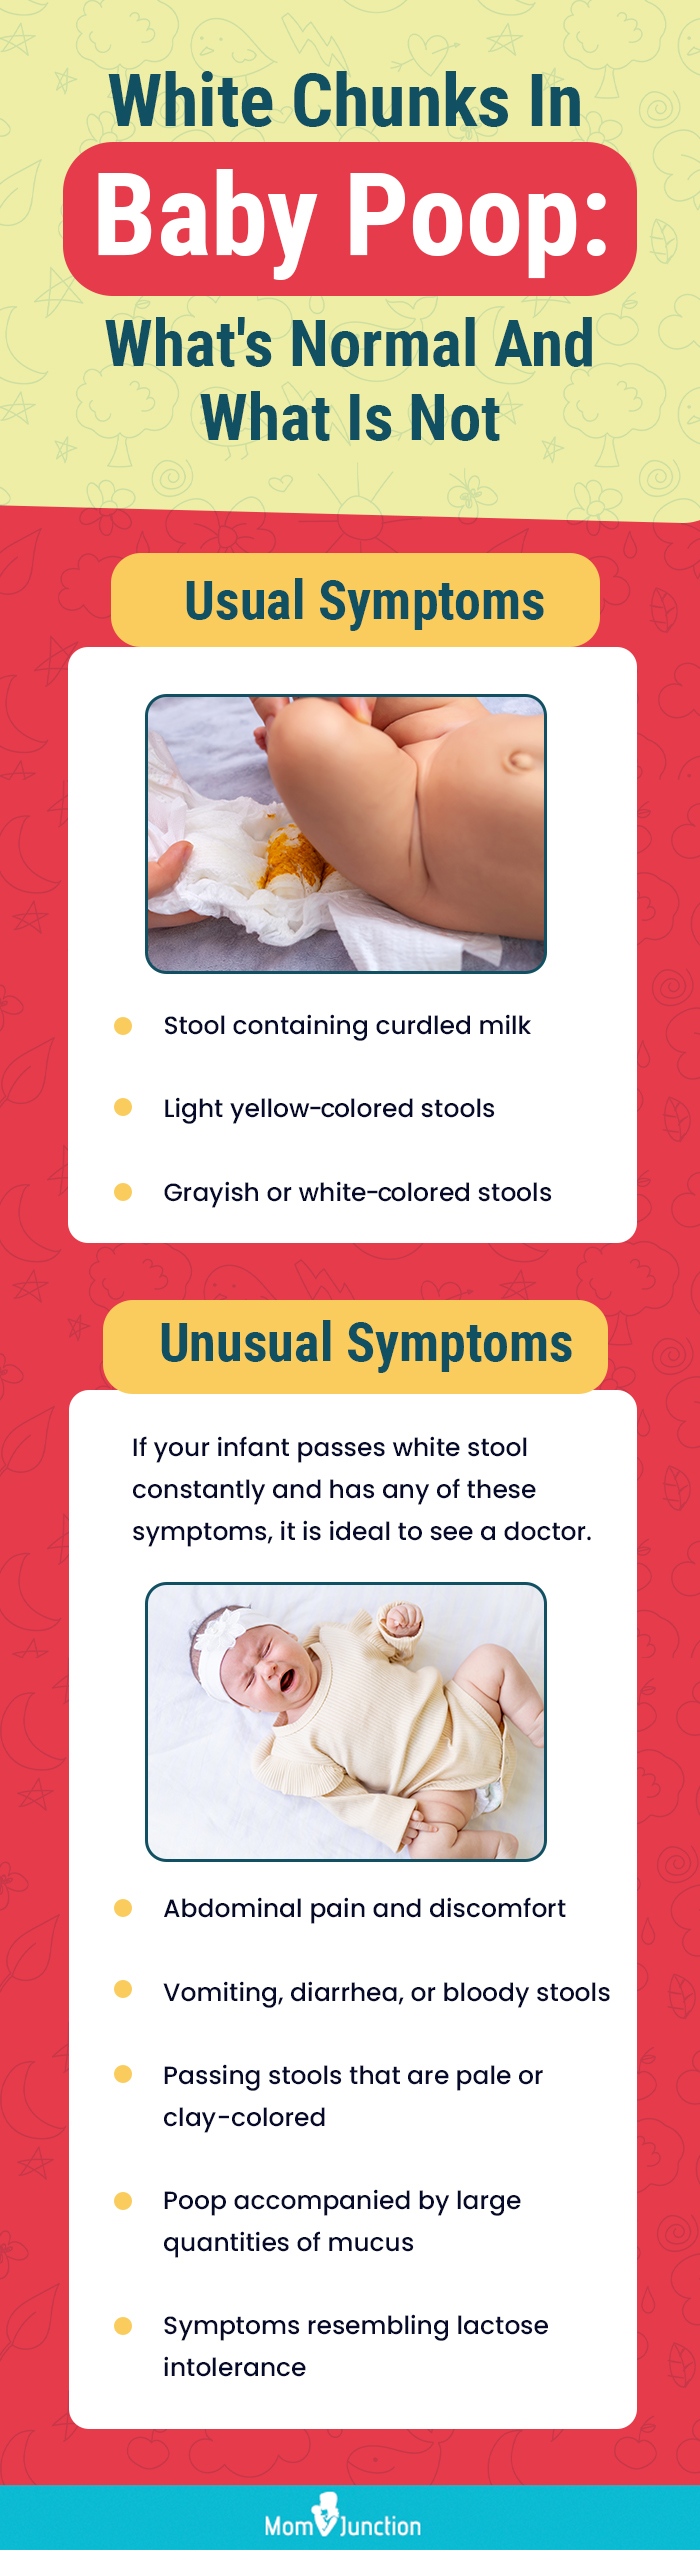 white chunks in baby poop whats normal and what is not [infographic]